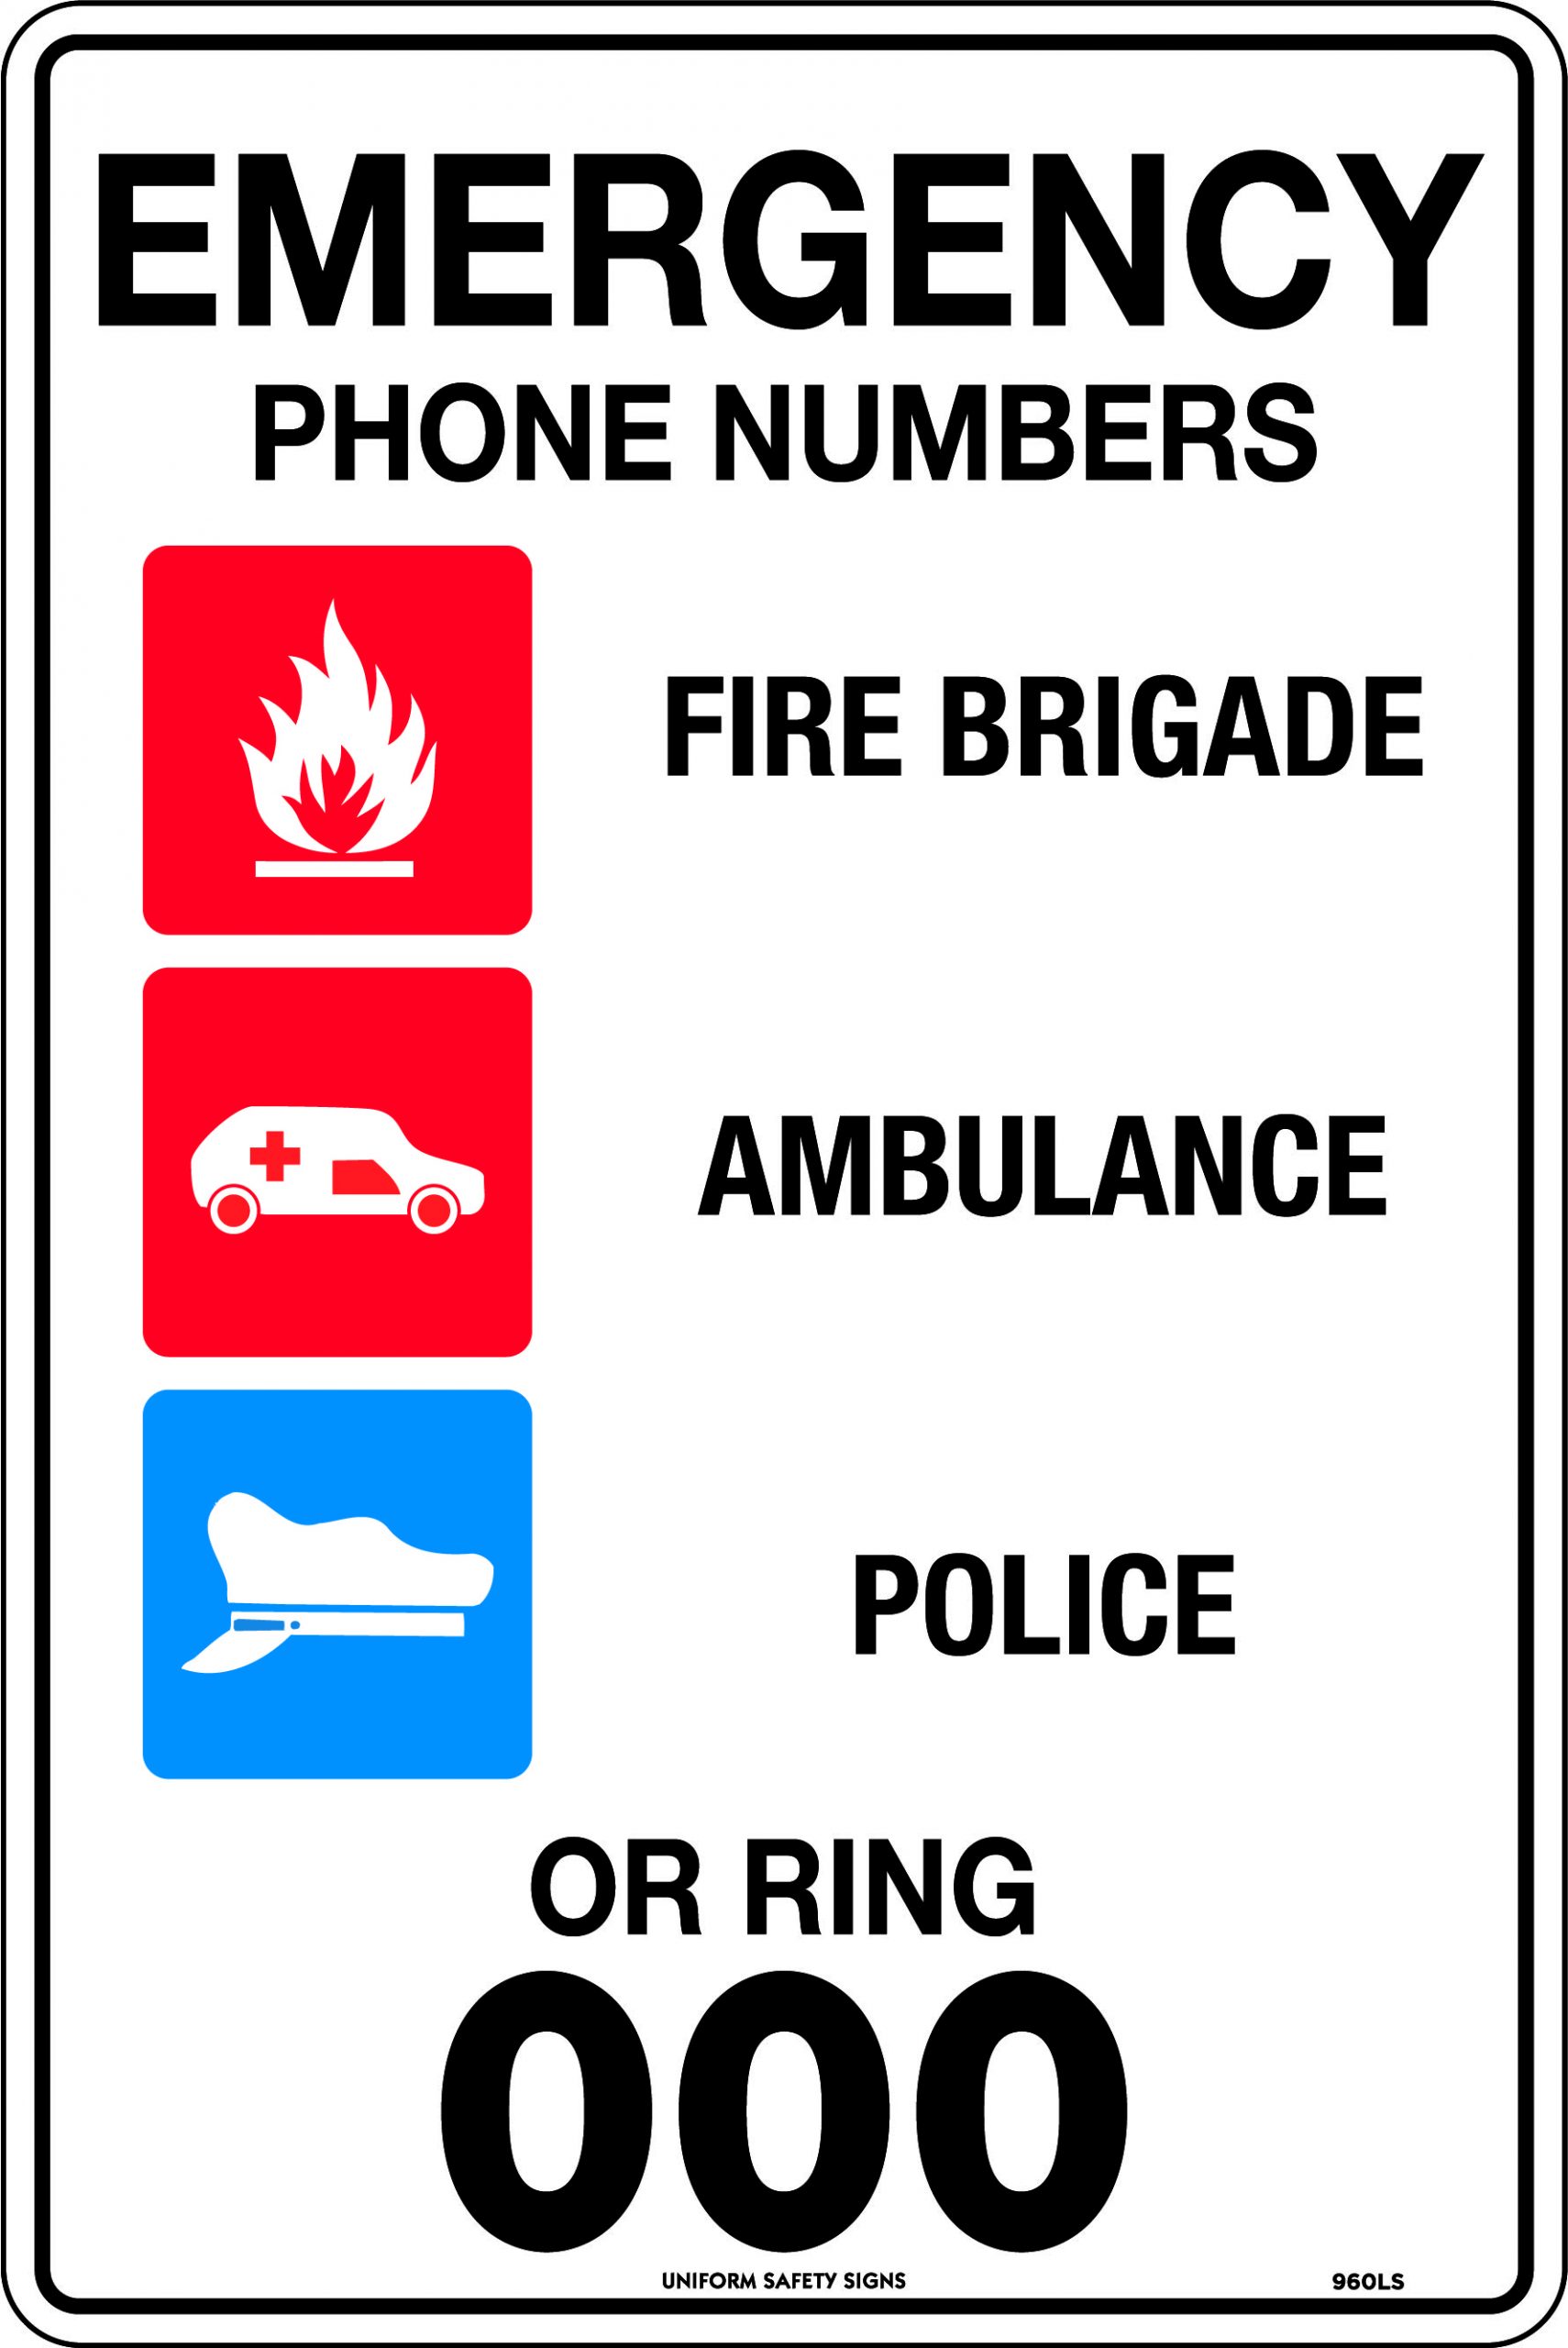 UNIFORM SAFETY 450X300MM POLY EMERGENCY PHONE NUMBERS OR RING 000